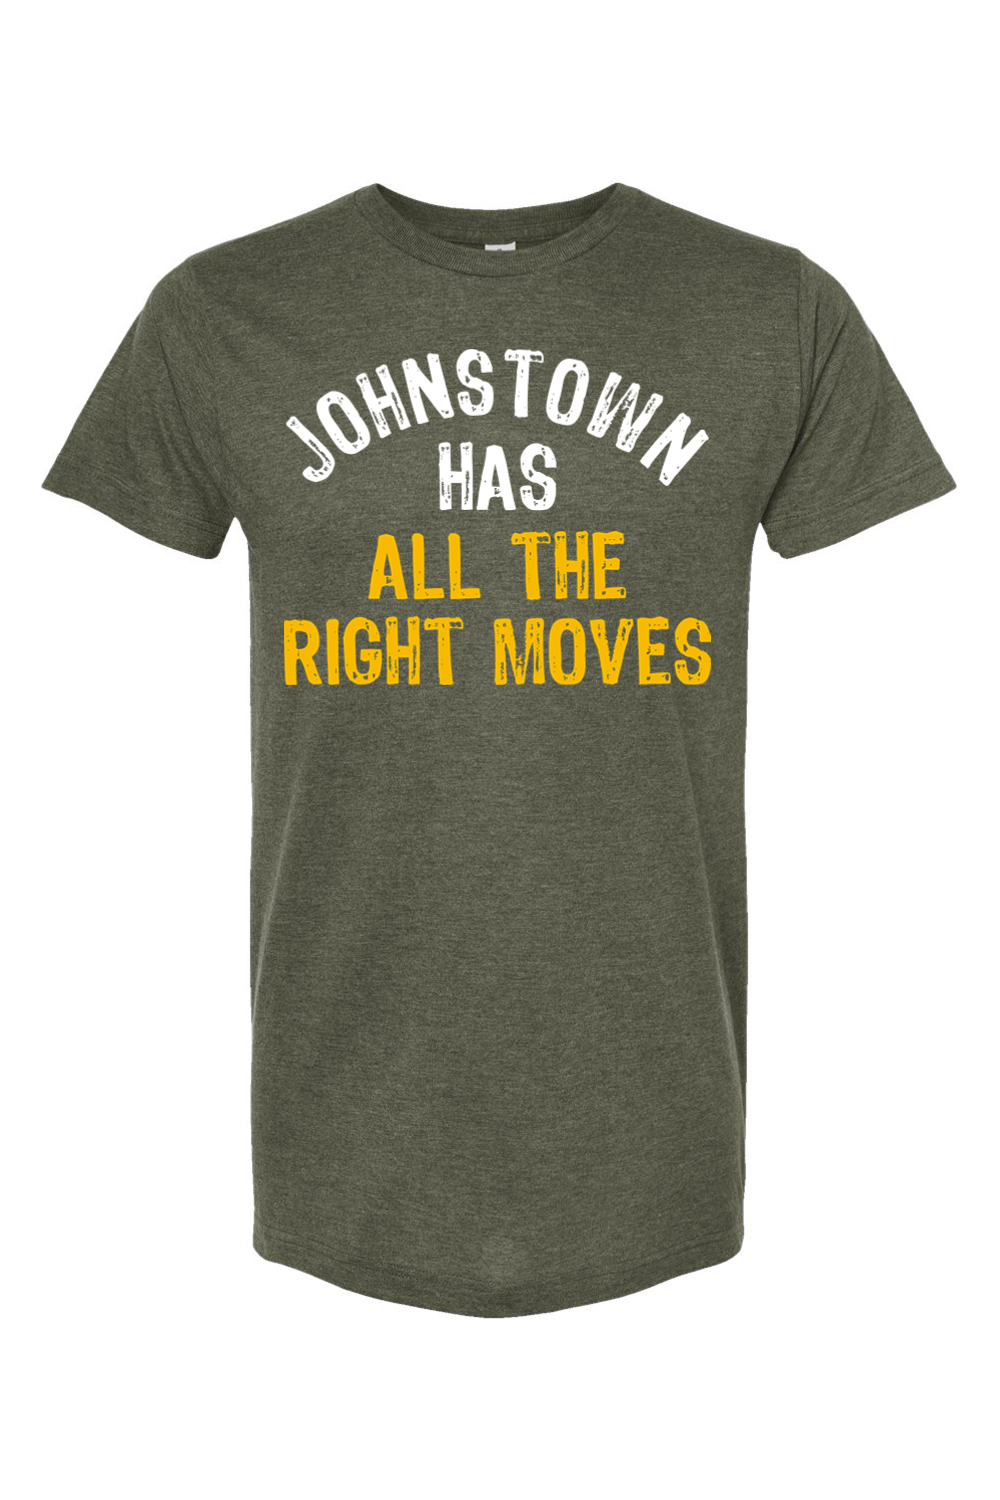 Johnstown Has All The Right Moves - Yinzylvania